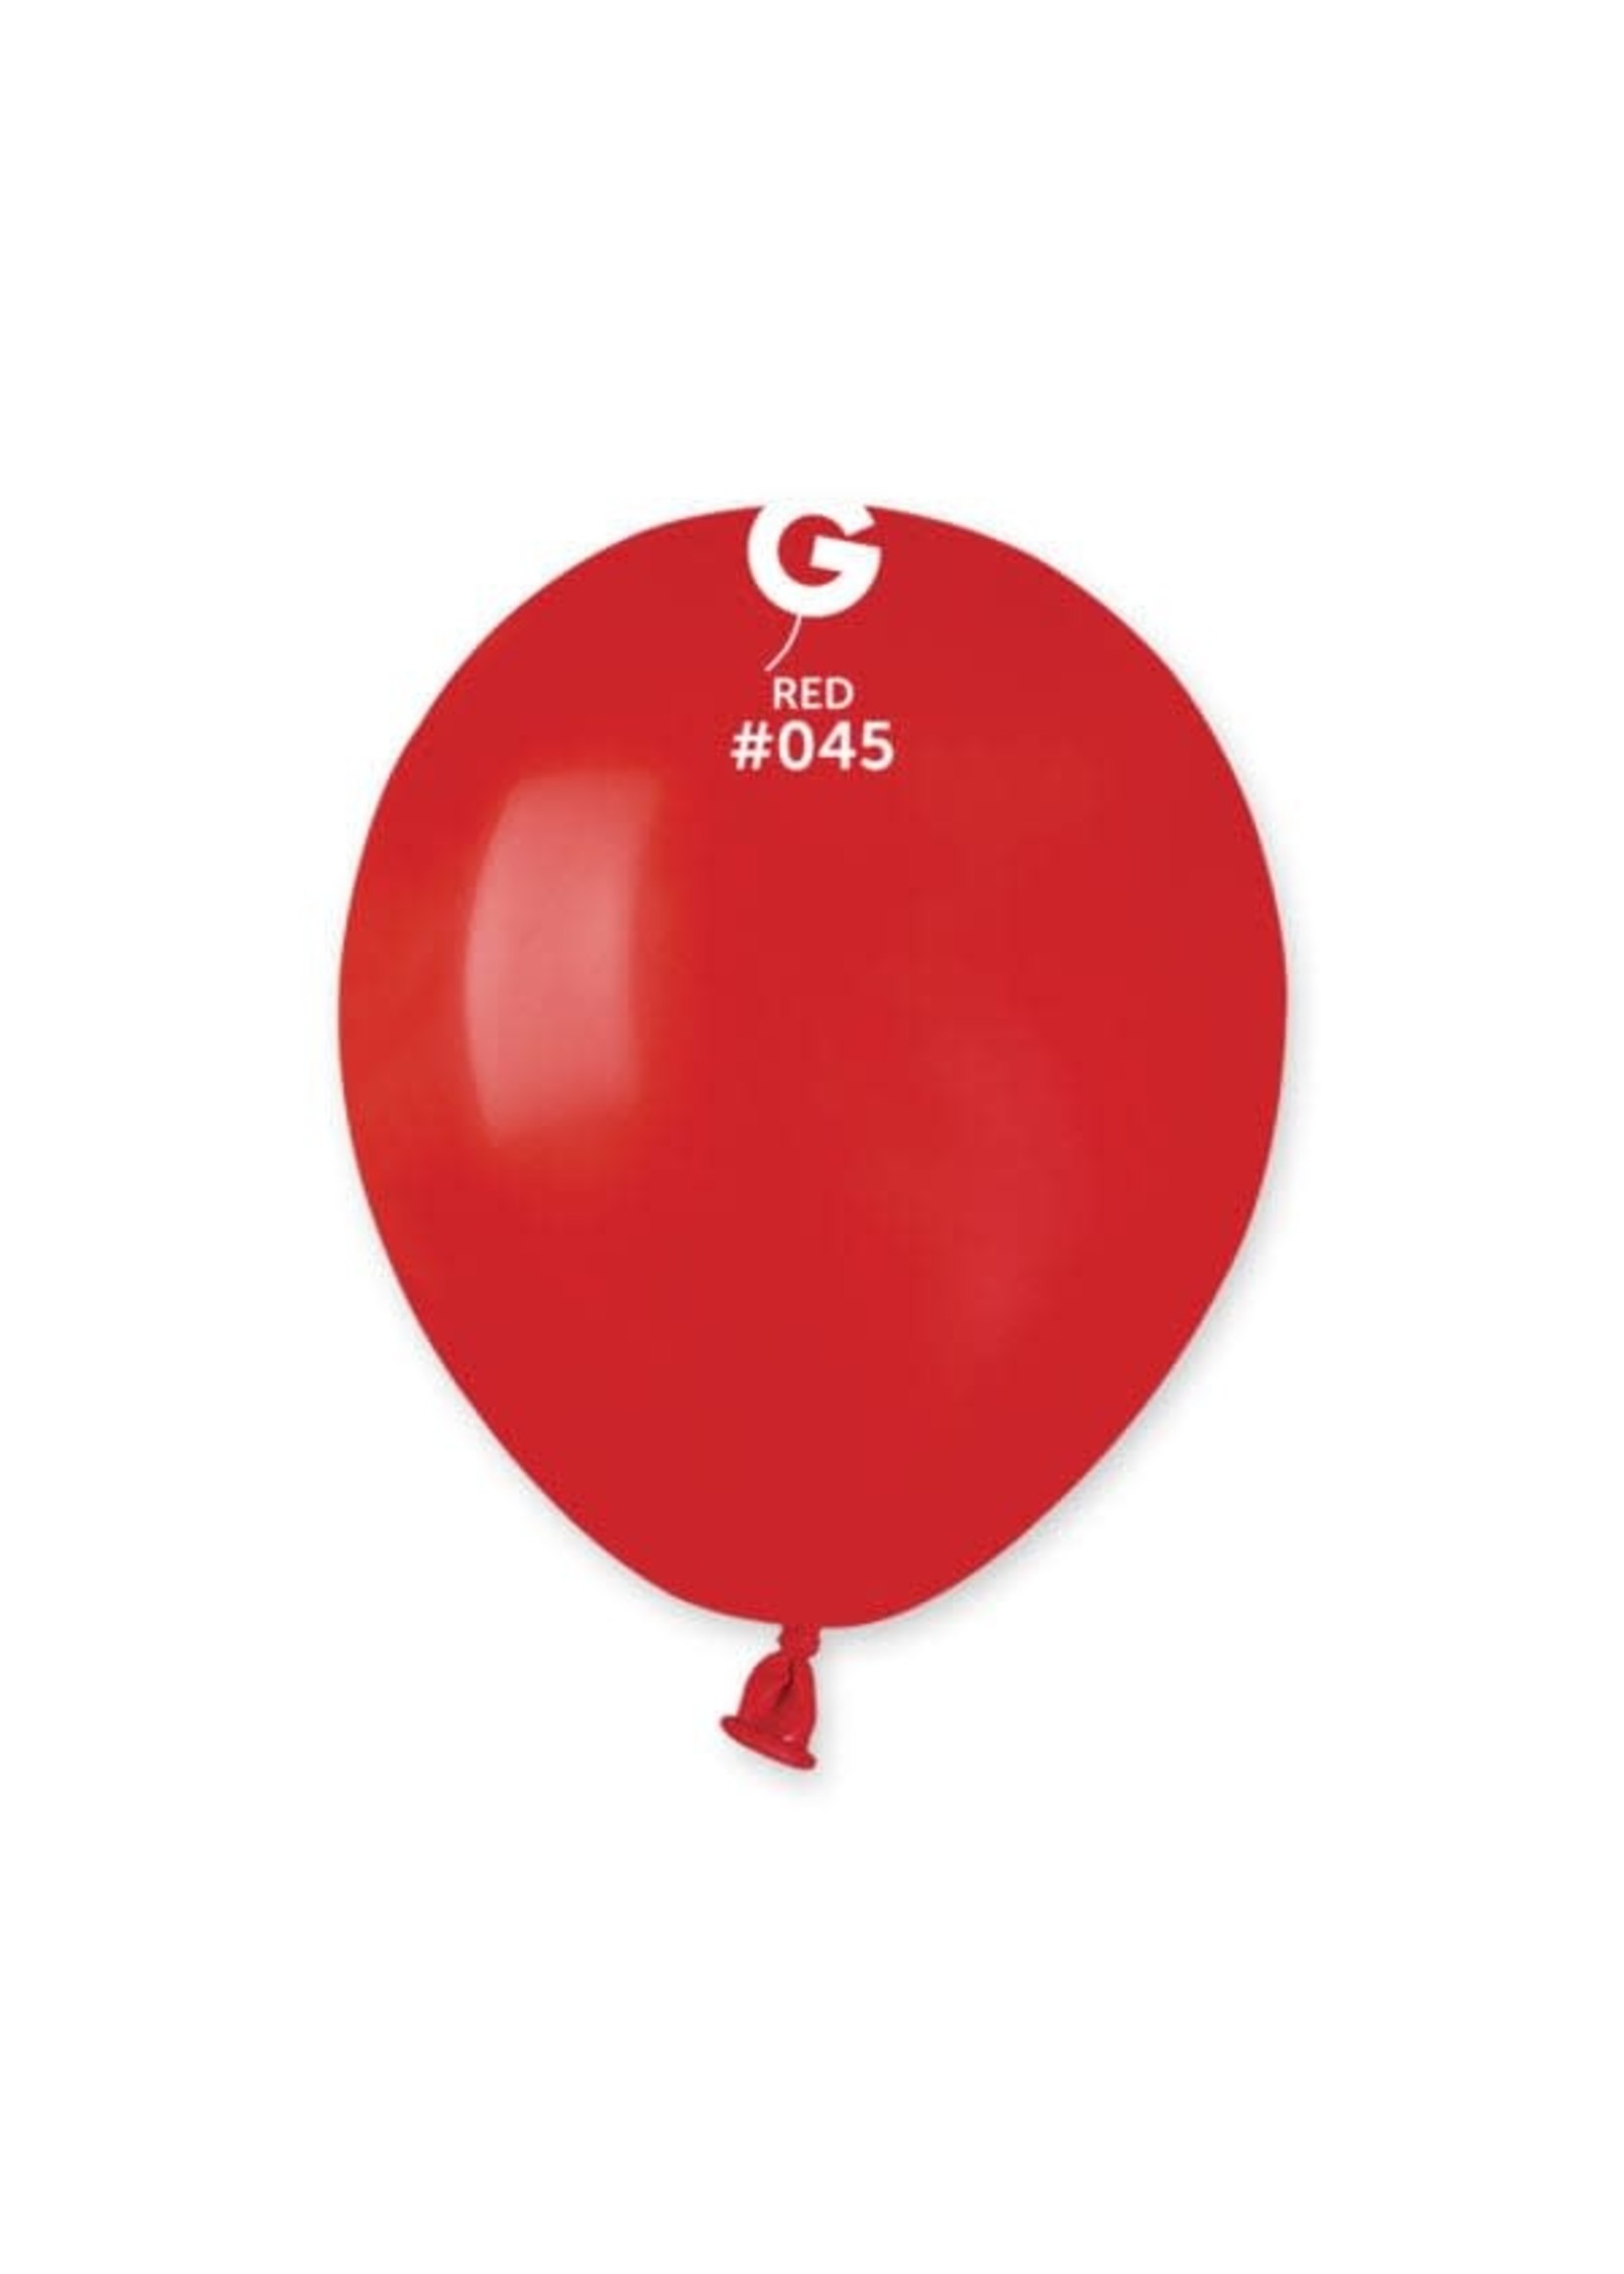 GEMAR Red #045 Latex Balloons, 5in, 100ct